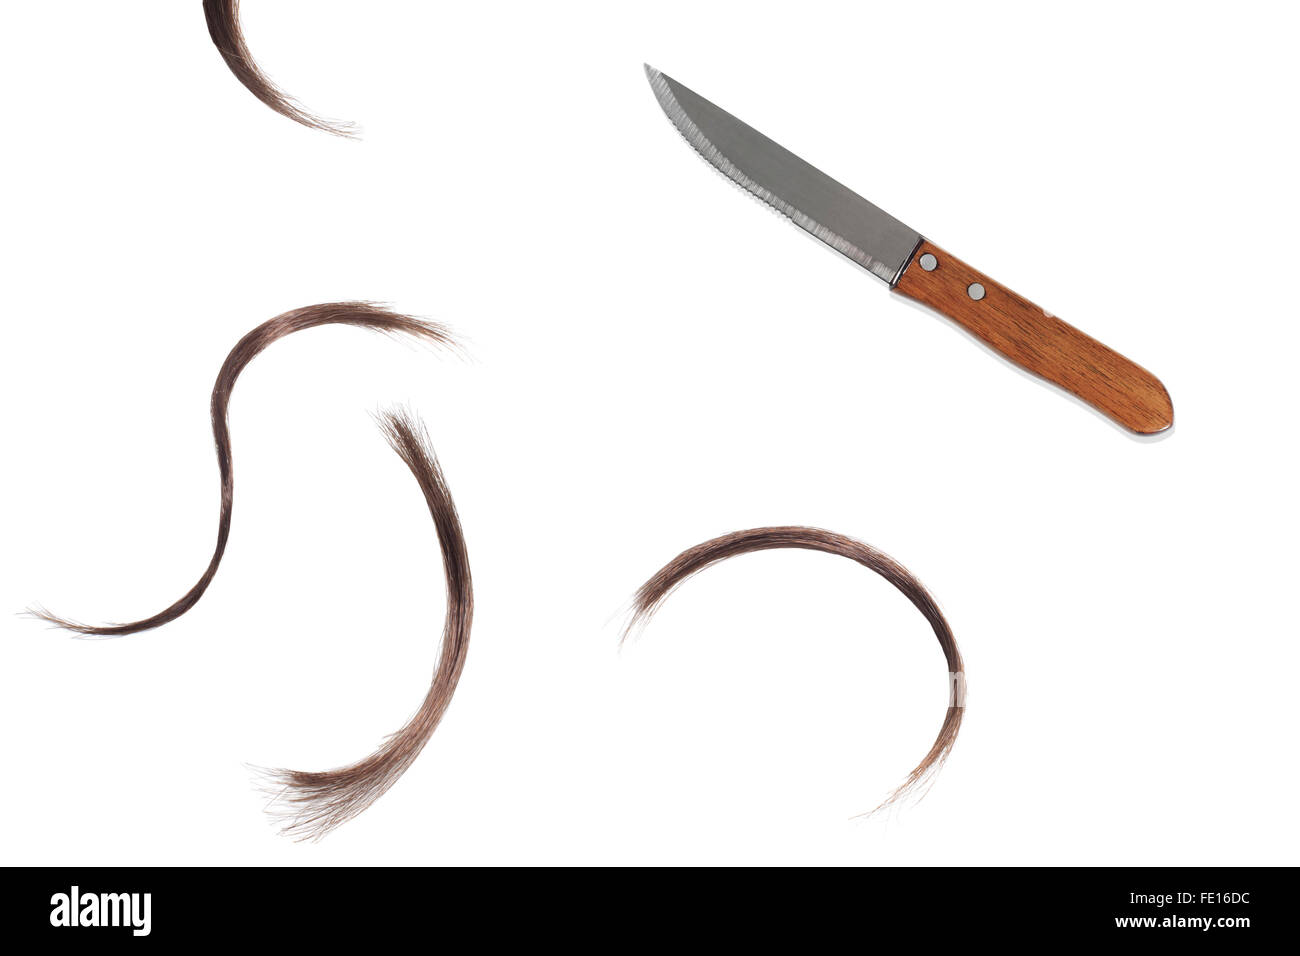 Studio Shot of a Kitchen Knife and Hair Clippings on a White Background Stock Photo